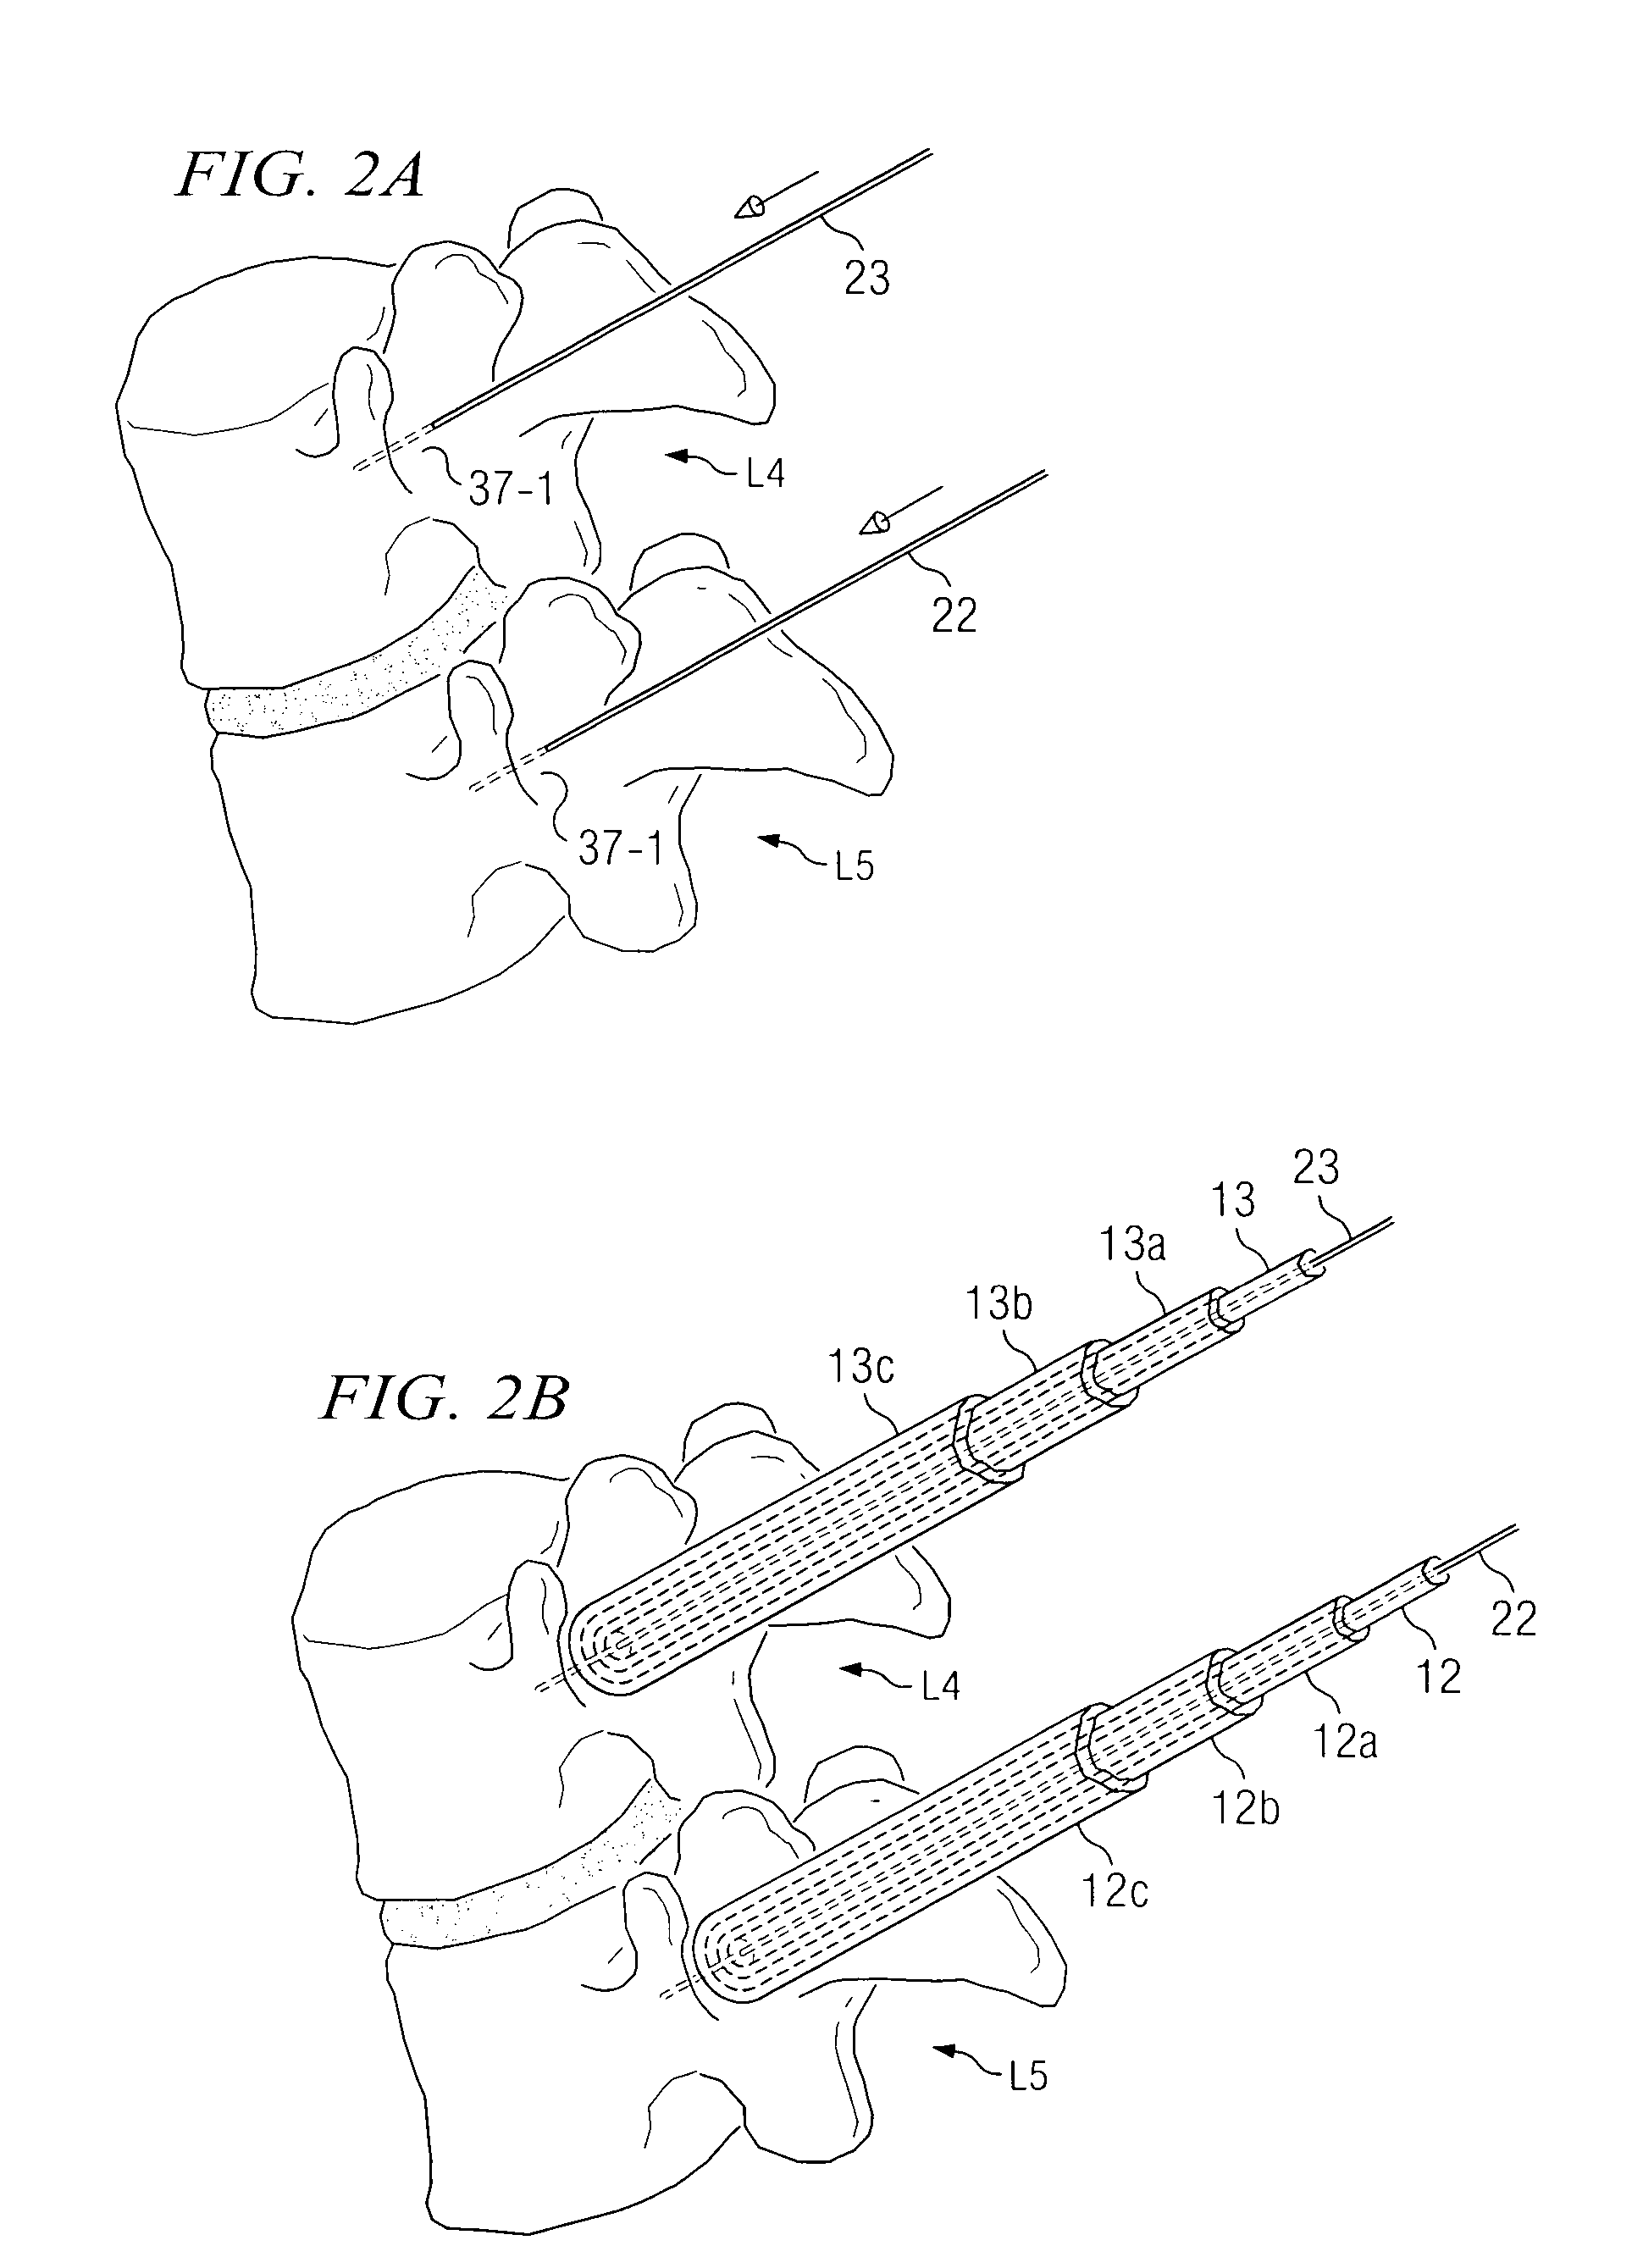 System and method for stabilizing of internal structures